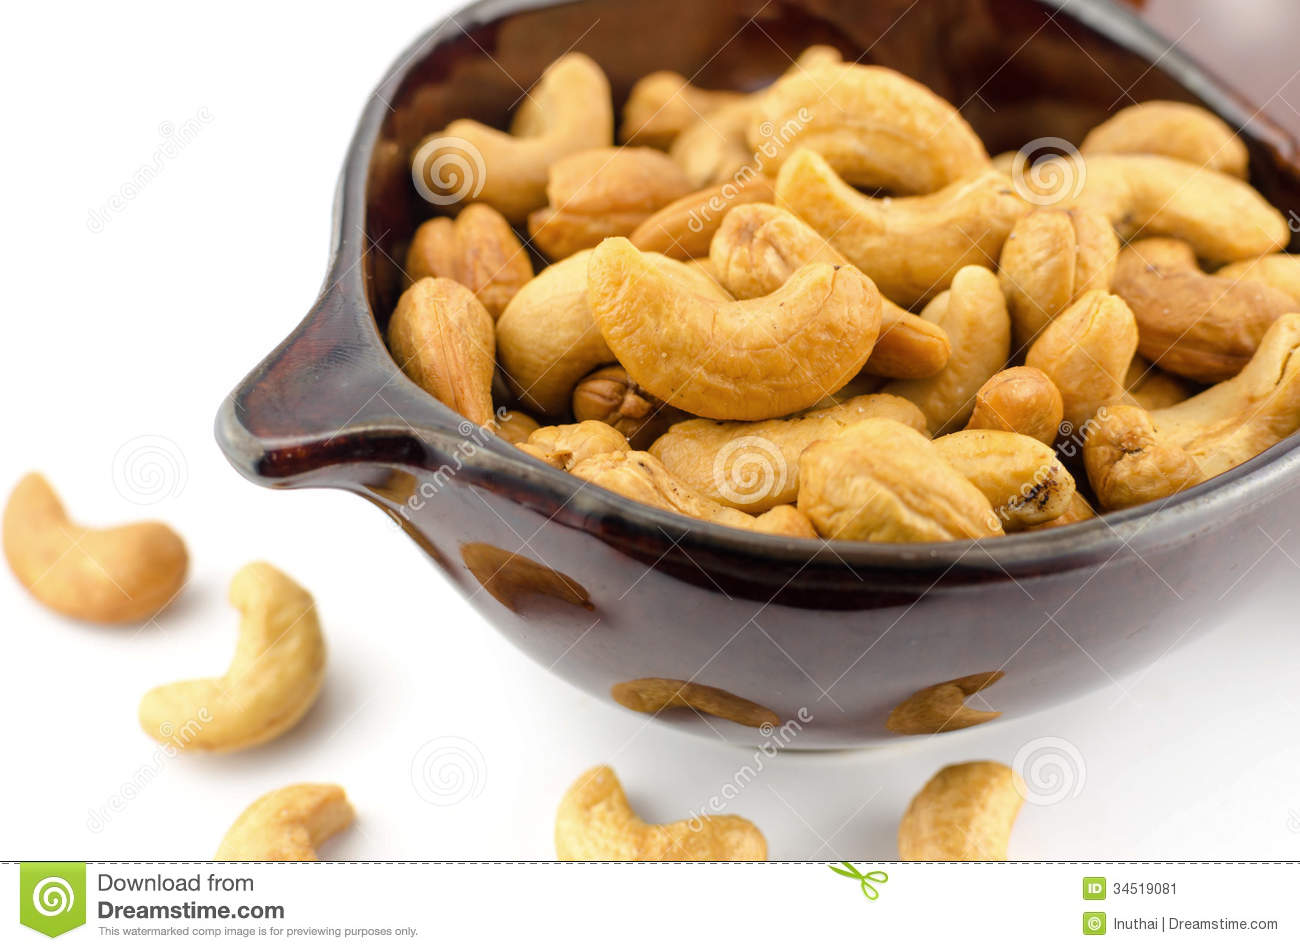 Roasted Cashew Nuts Are Salty  Stock Image   Image  34519081